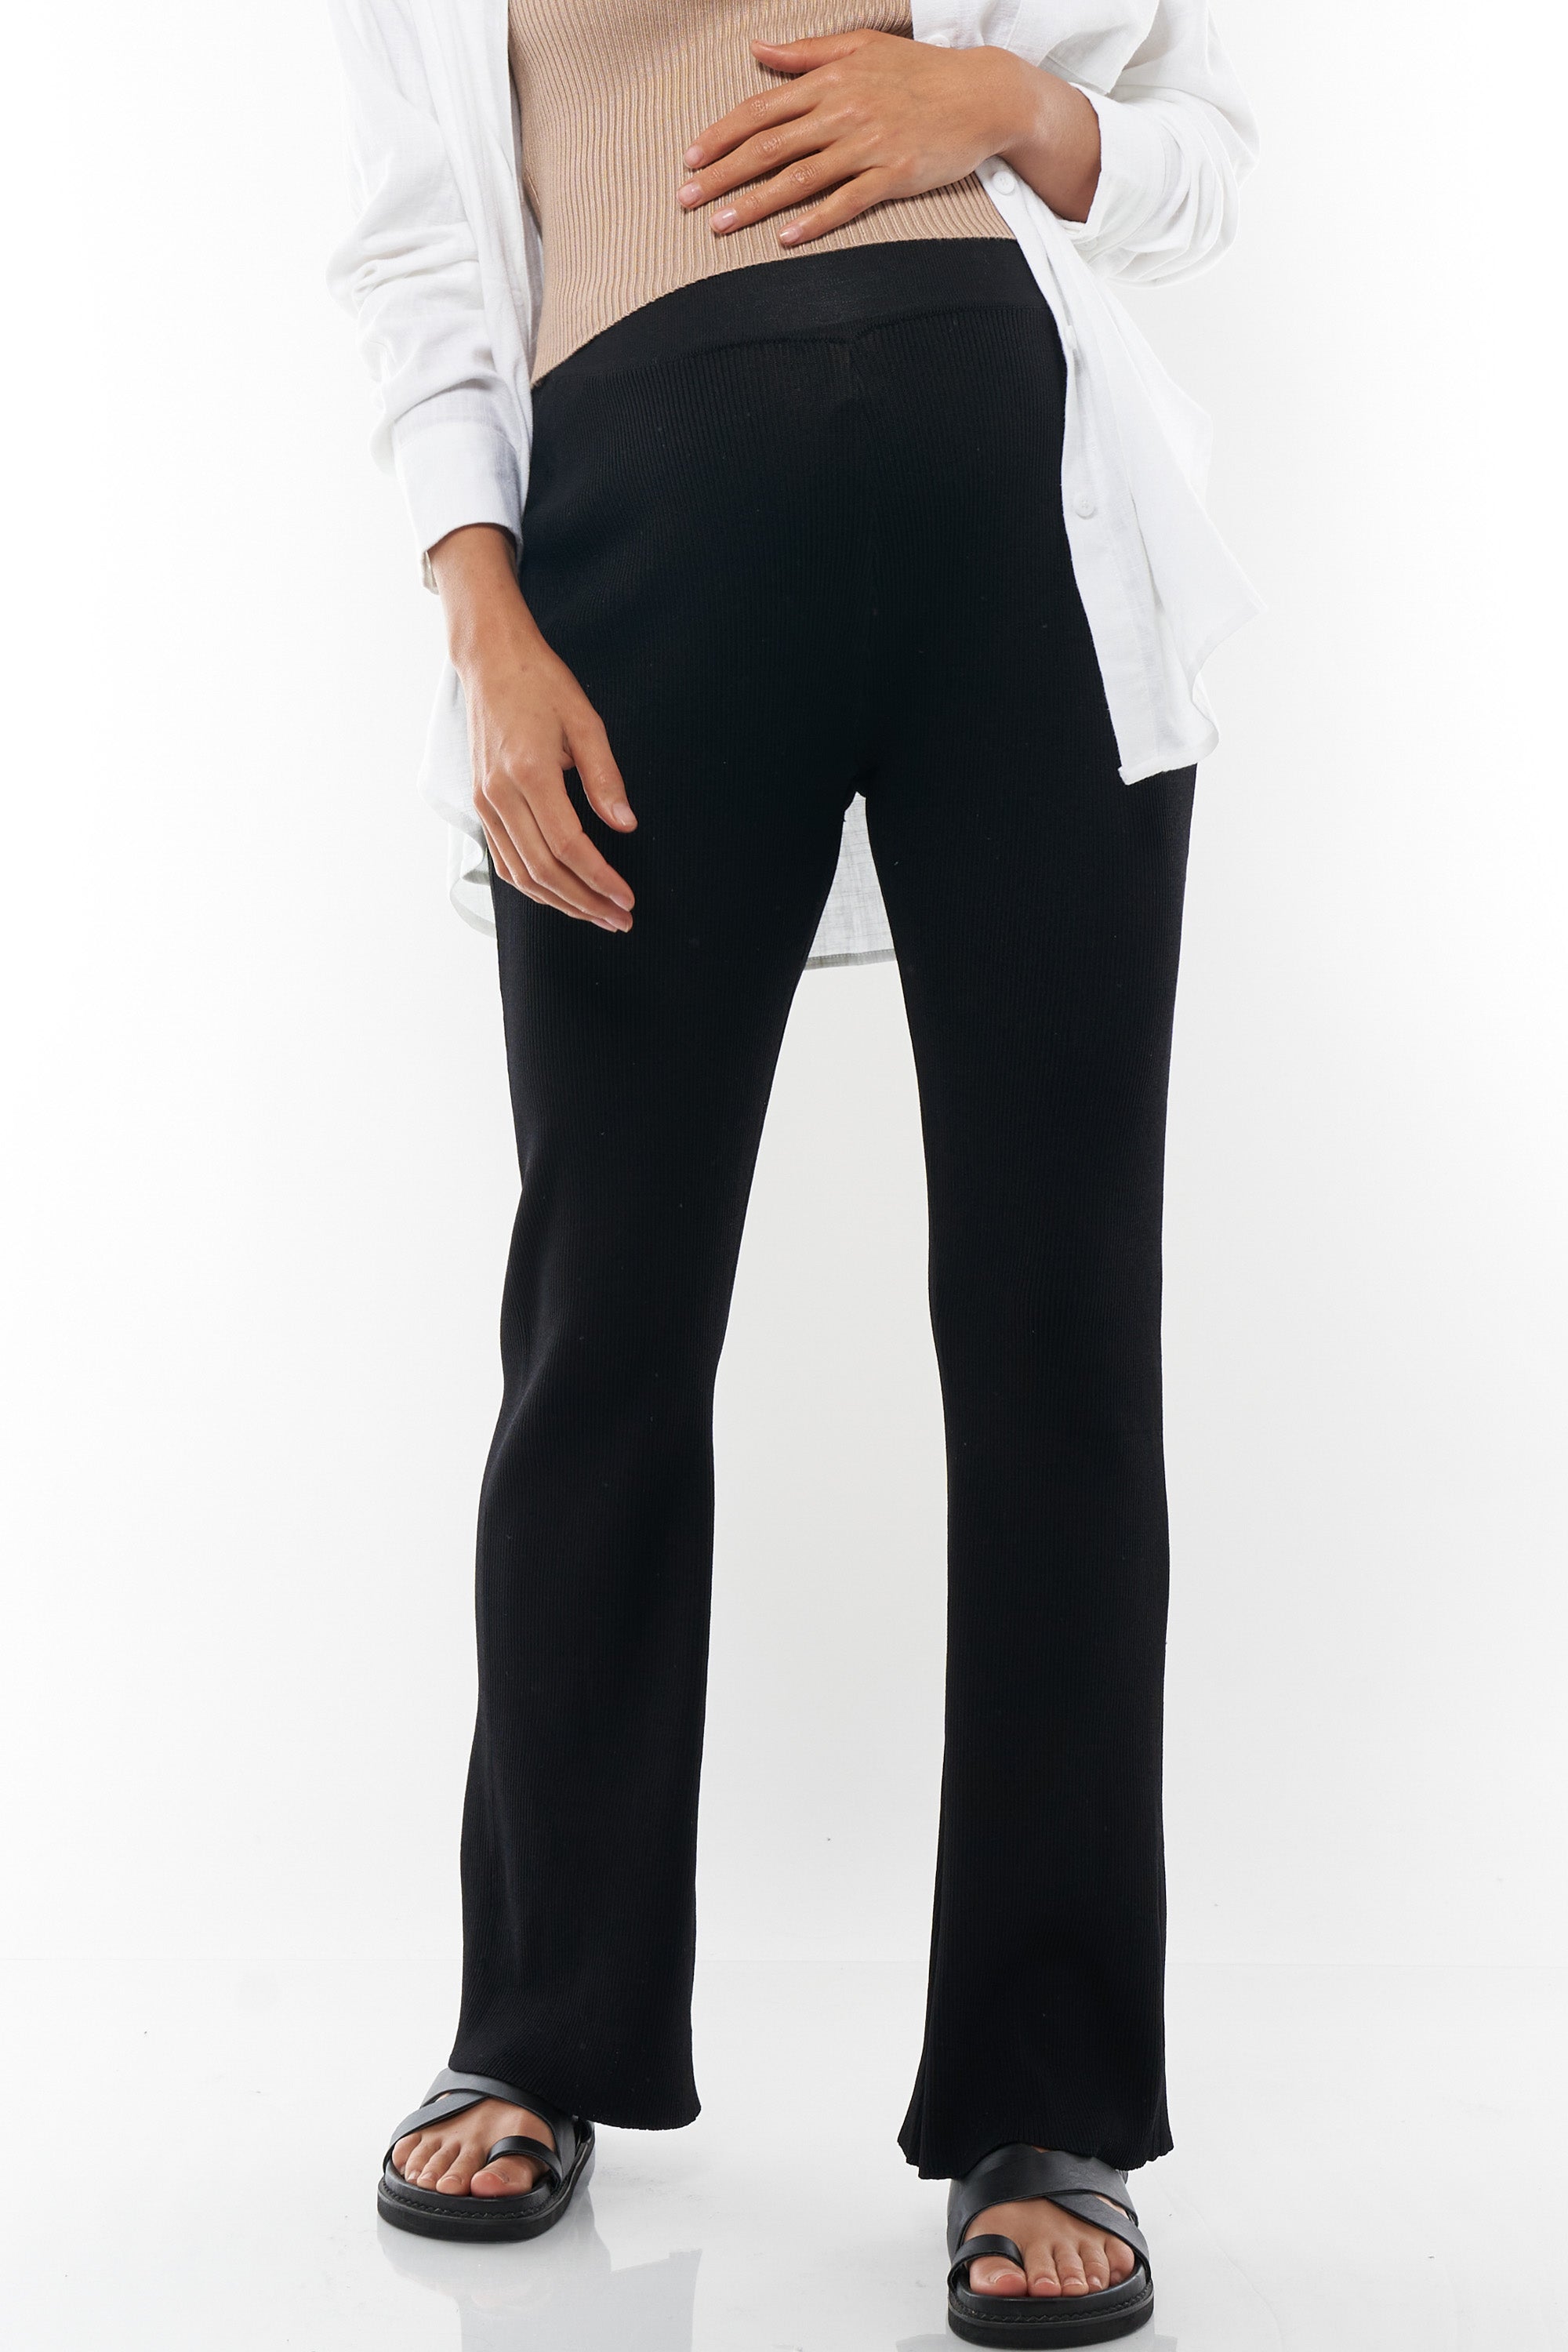 Maternity Work Clothes | Seraphine US